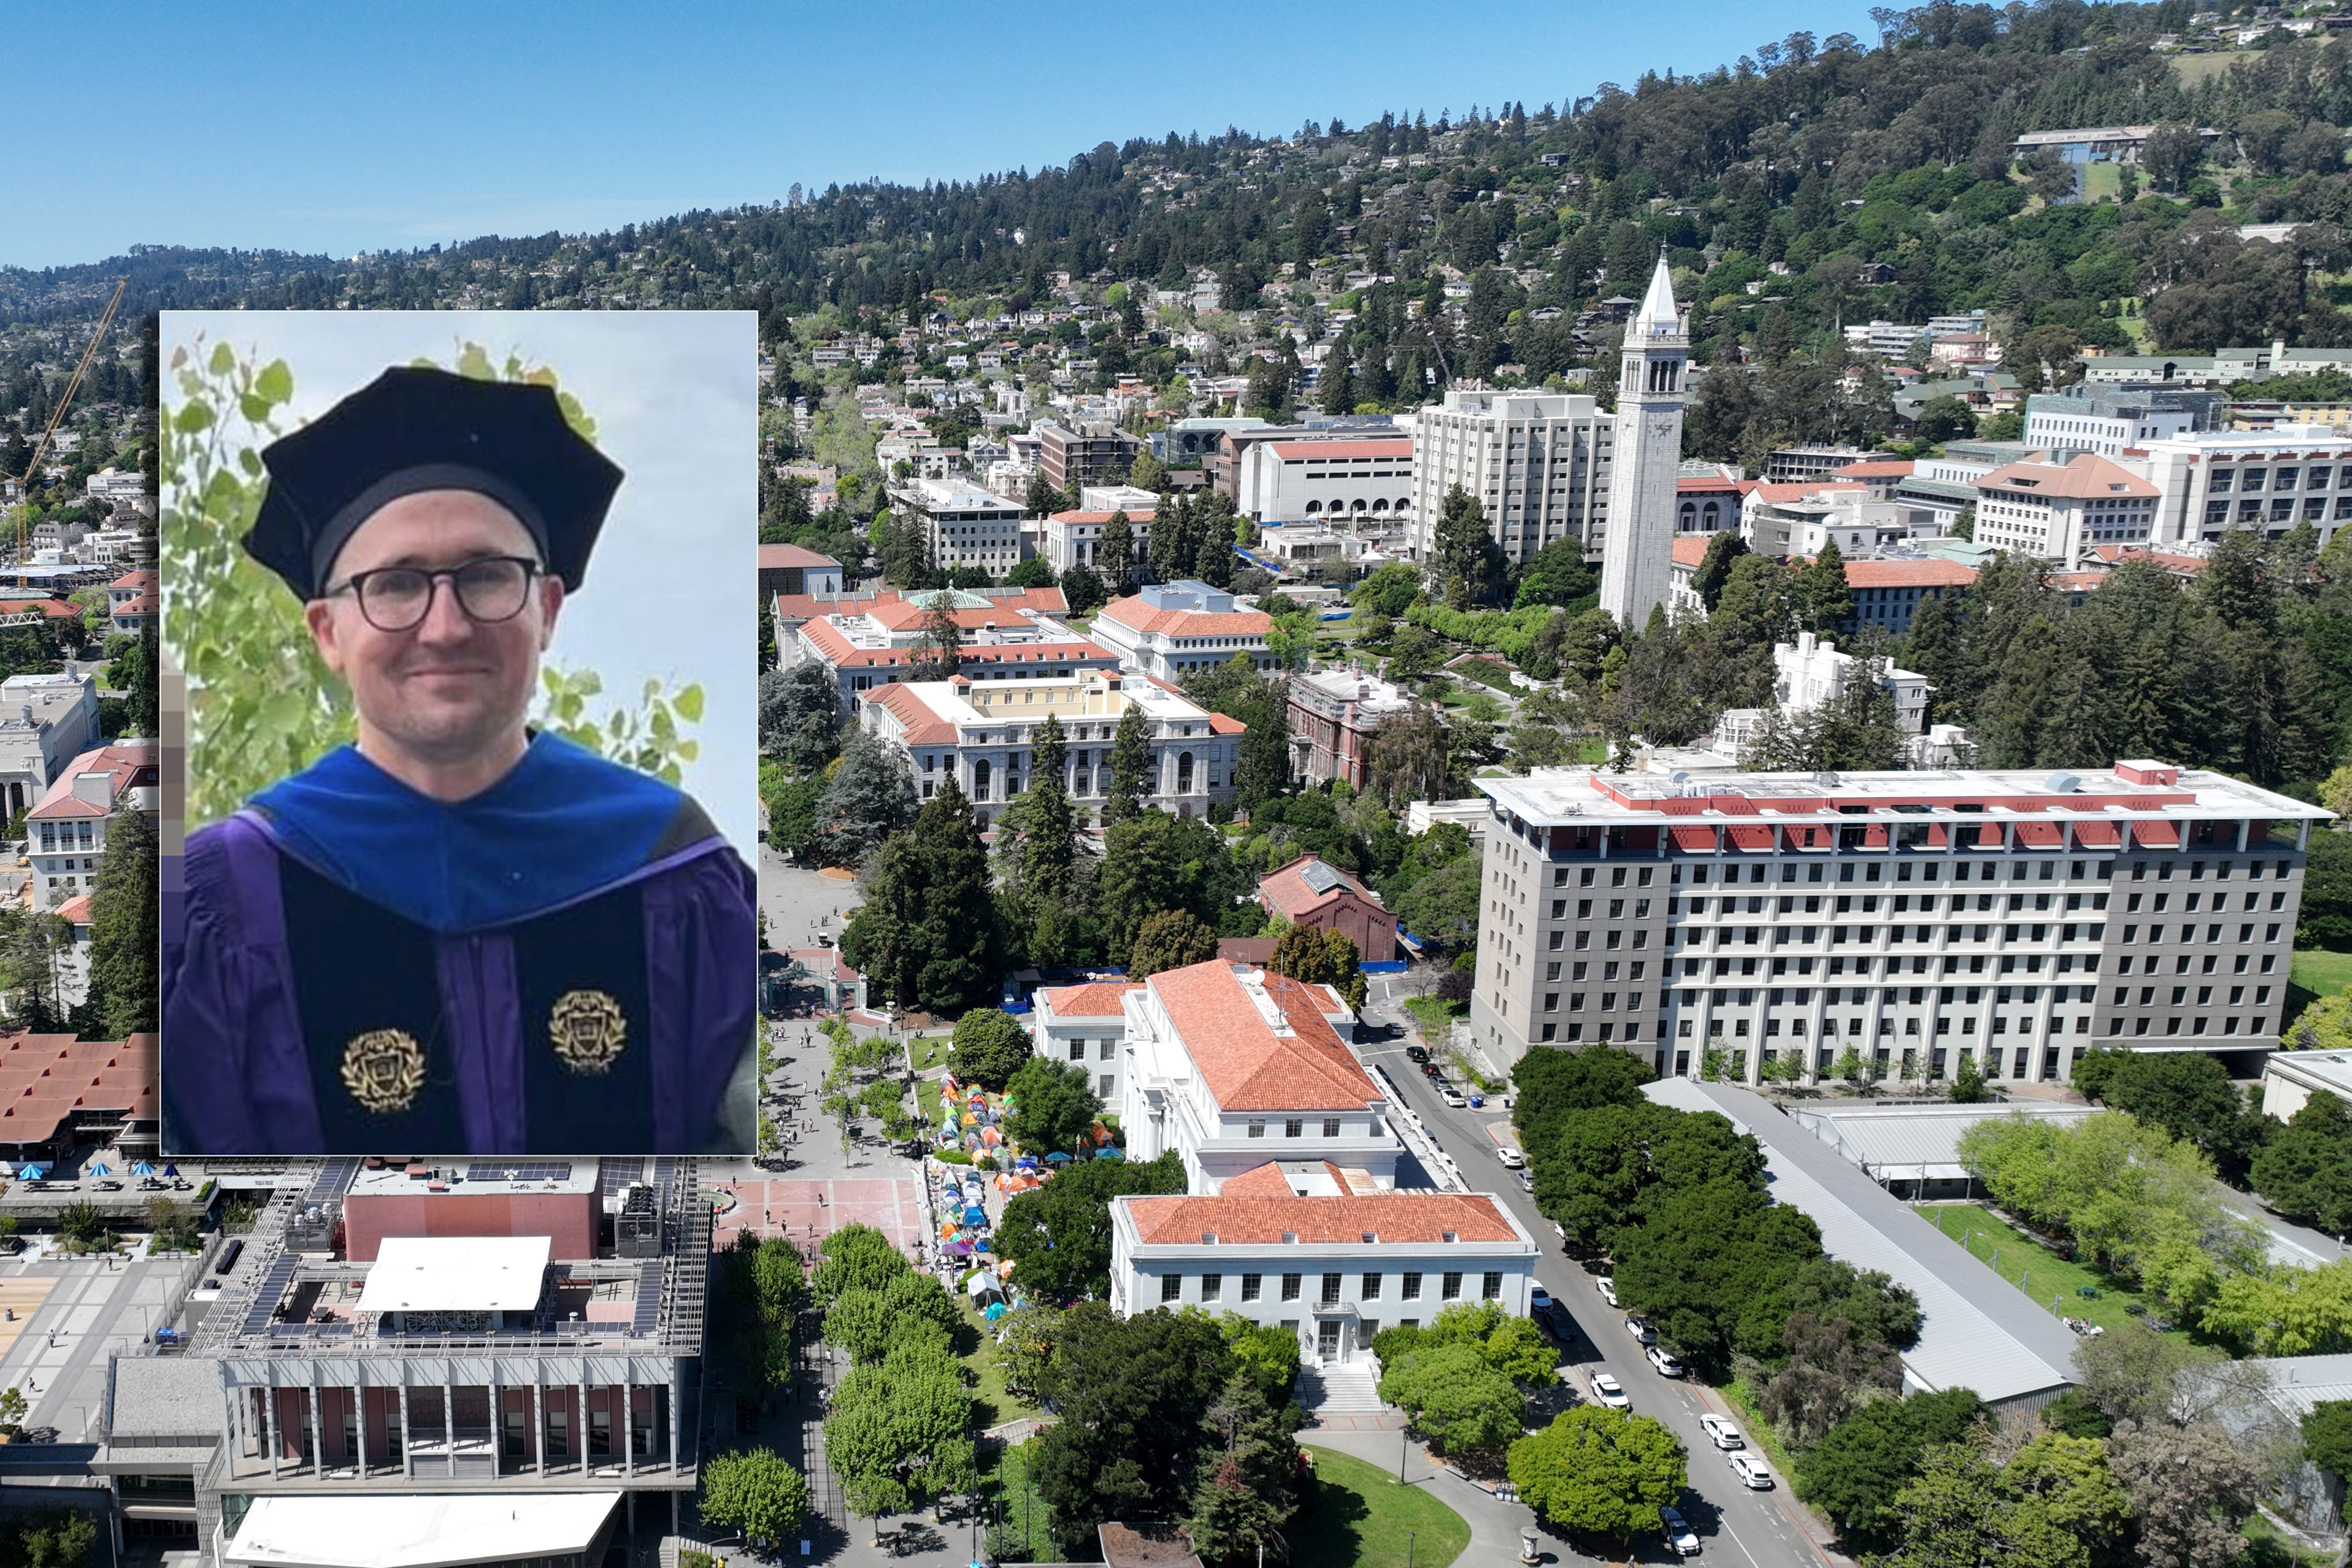 A photo illustration shows a man in a cap and gown for a university graduation next to an aerial view of the UC Berkeley campus